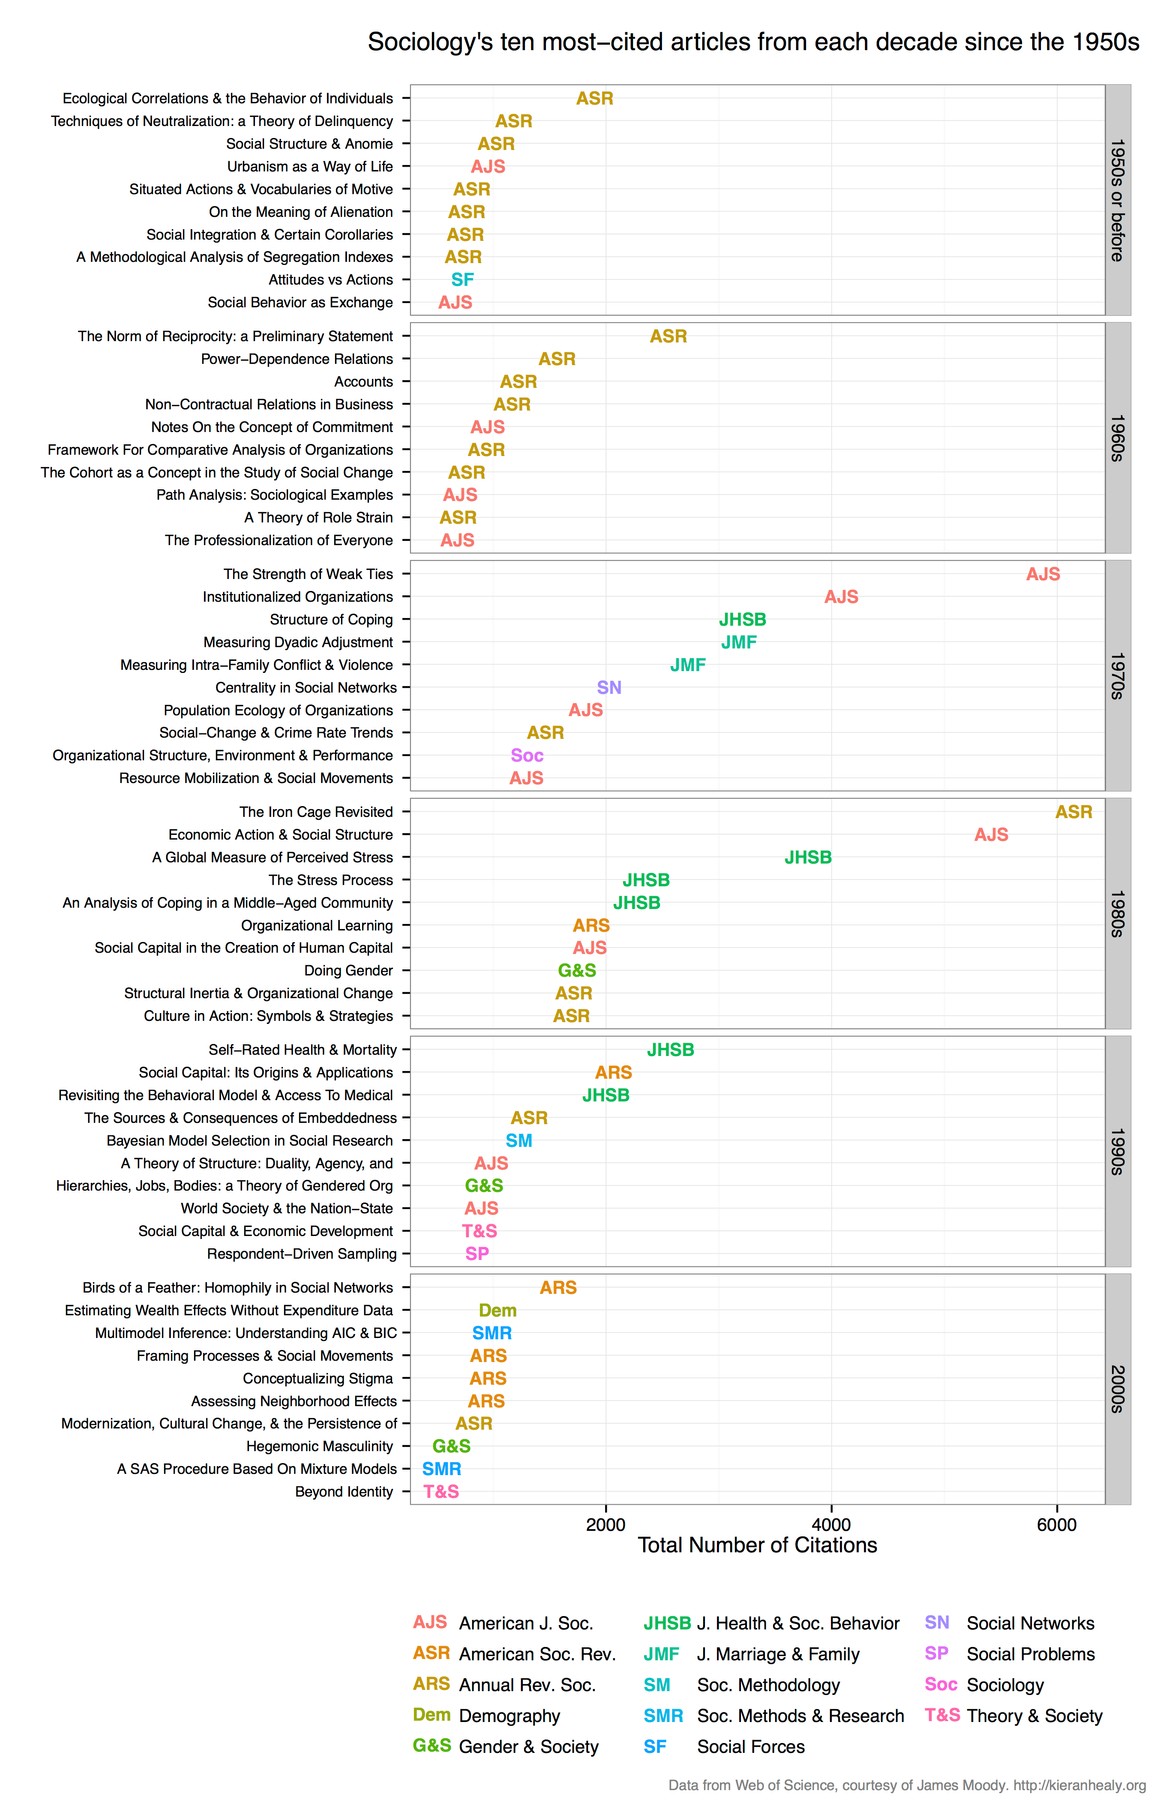 Sociology's Most Cited Papers by Decade